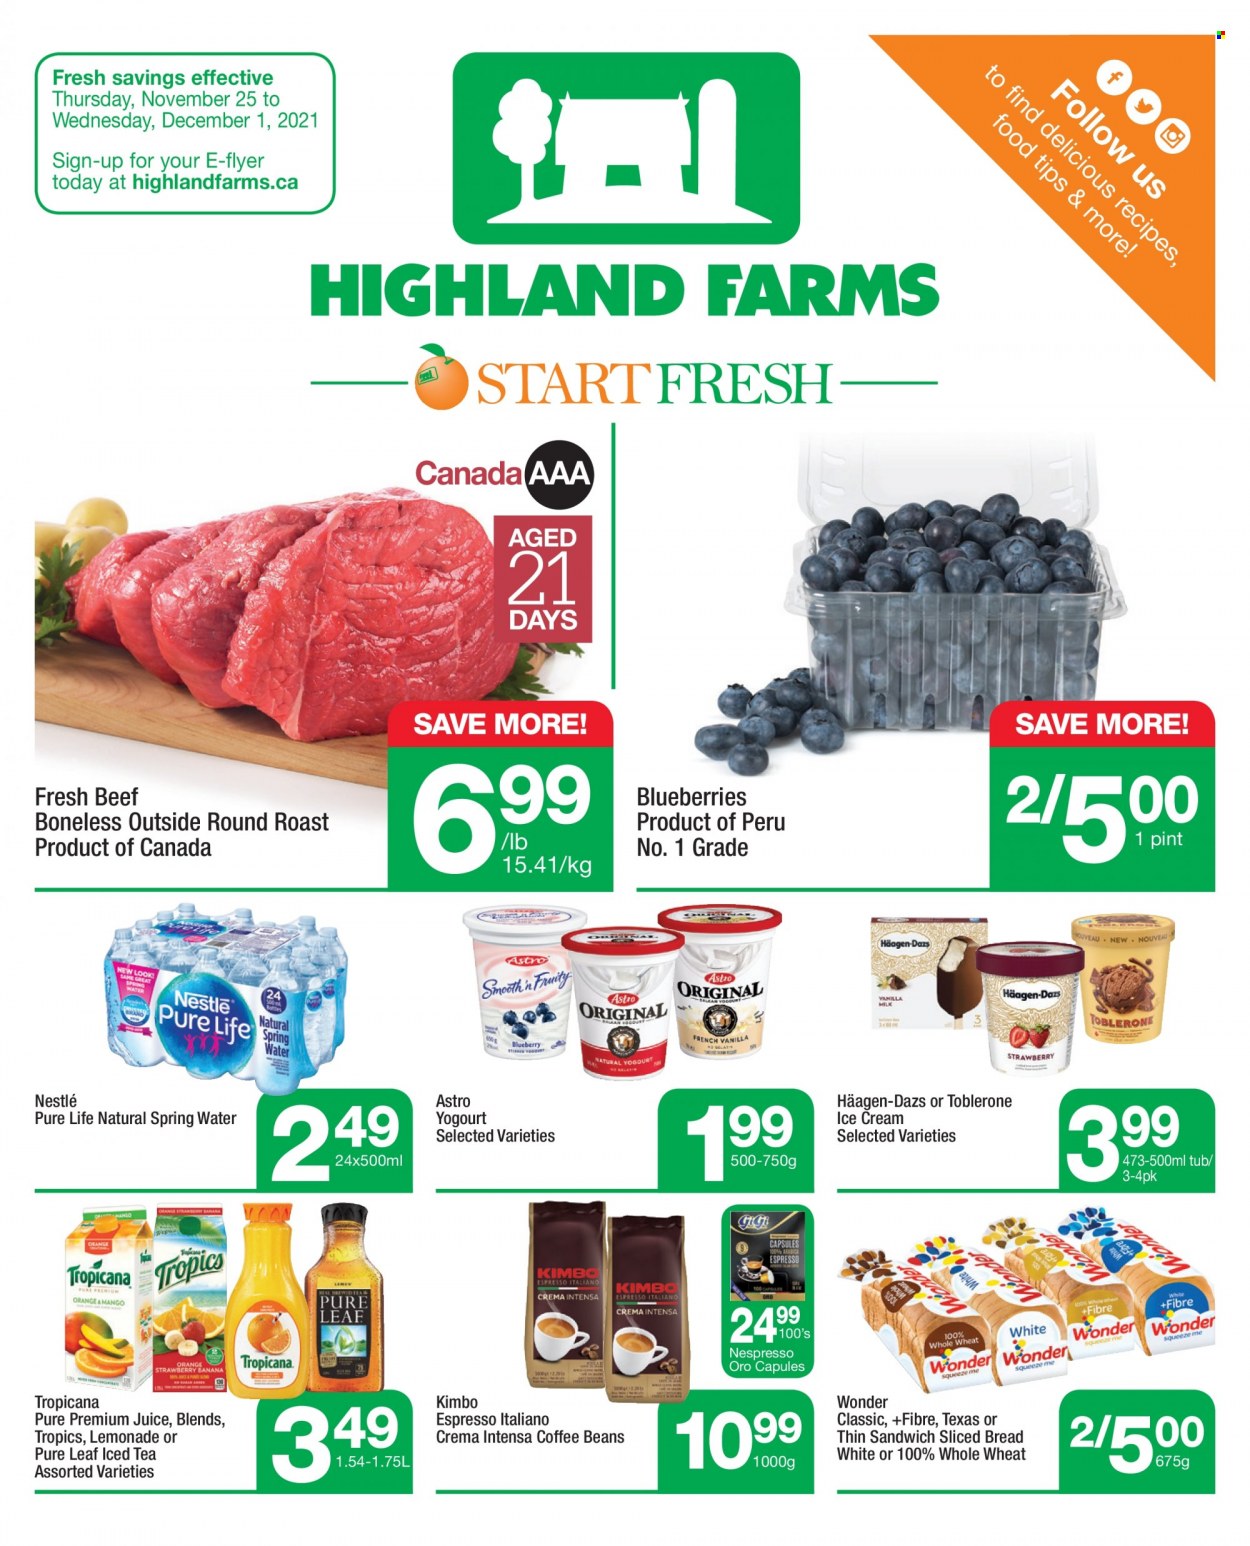 thumbnail - Highland Farms Flyer - November 25, 2021 - December 01, 2021 - Sales products - bread, blueberries, sandwich, ice cream, Häagen-Dazs, Toblerone, lemonade, juice, ice tea, spring water, Pure Leaf, Nespresso, coffee beans, beef meat, round roast, Nestlé. Page 1.